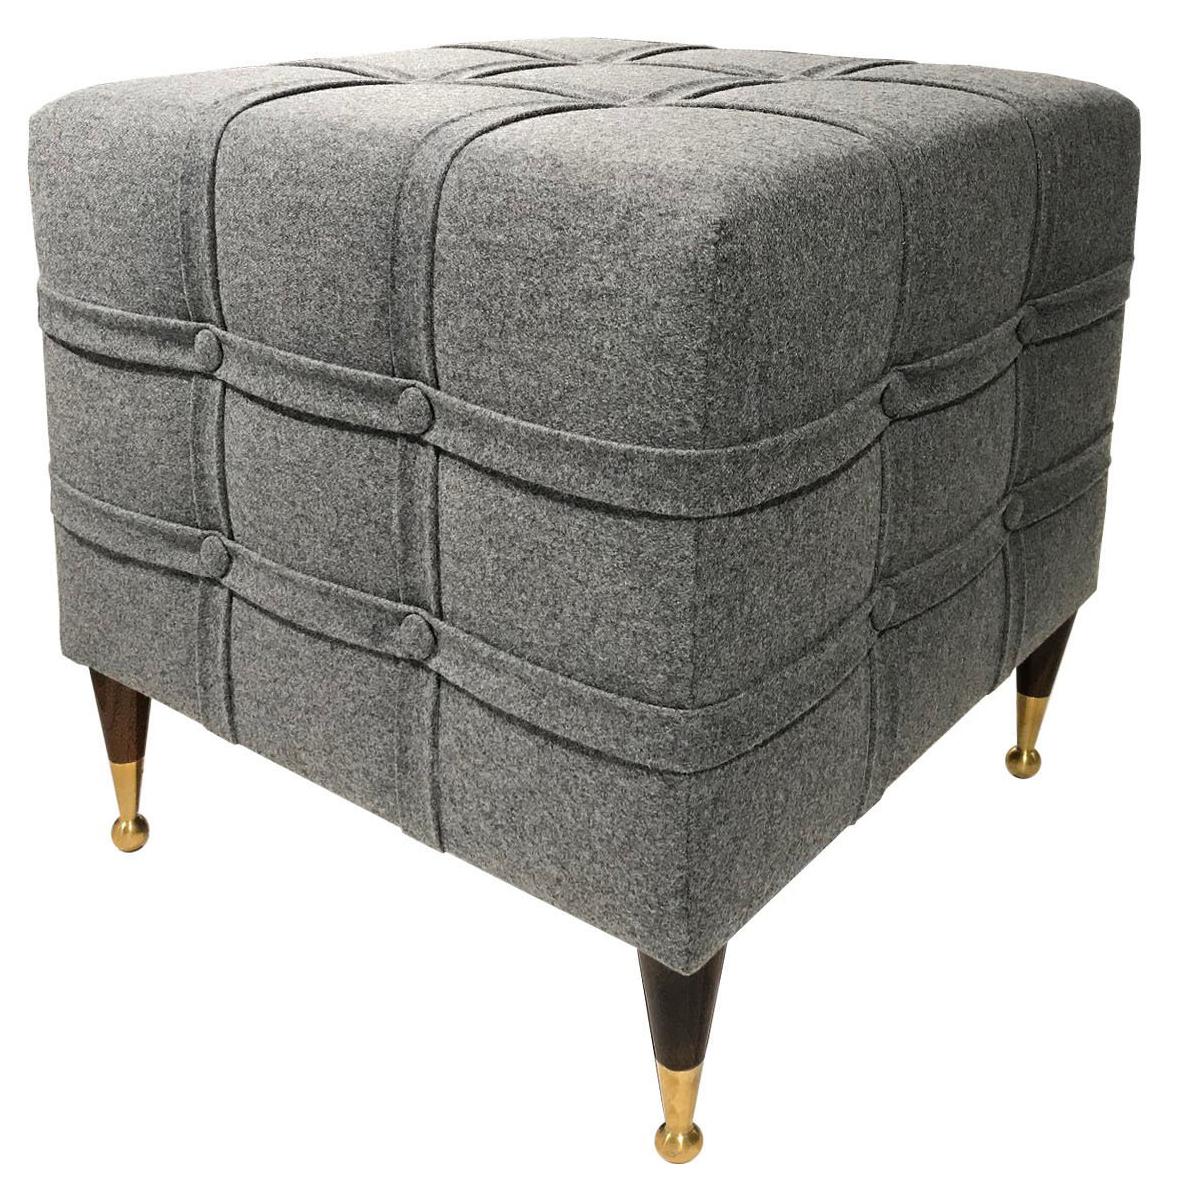 Soho Claremont Ottoman For Sale